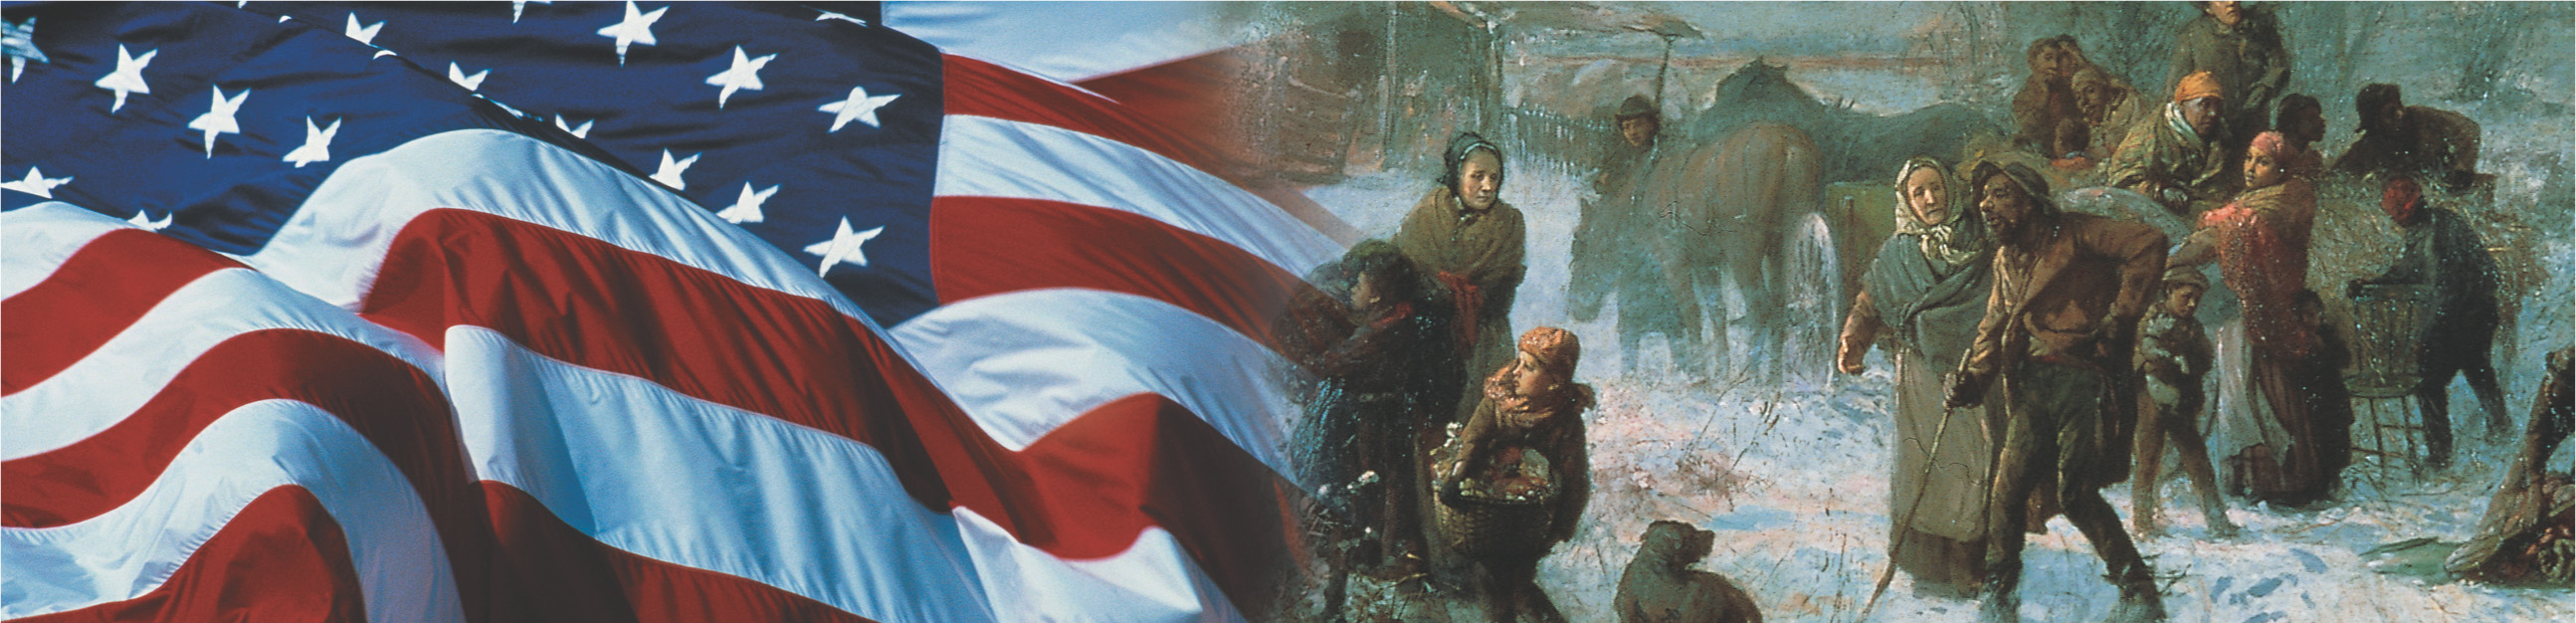 Banner: an American flag billows and a painting of families trudging through snow.